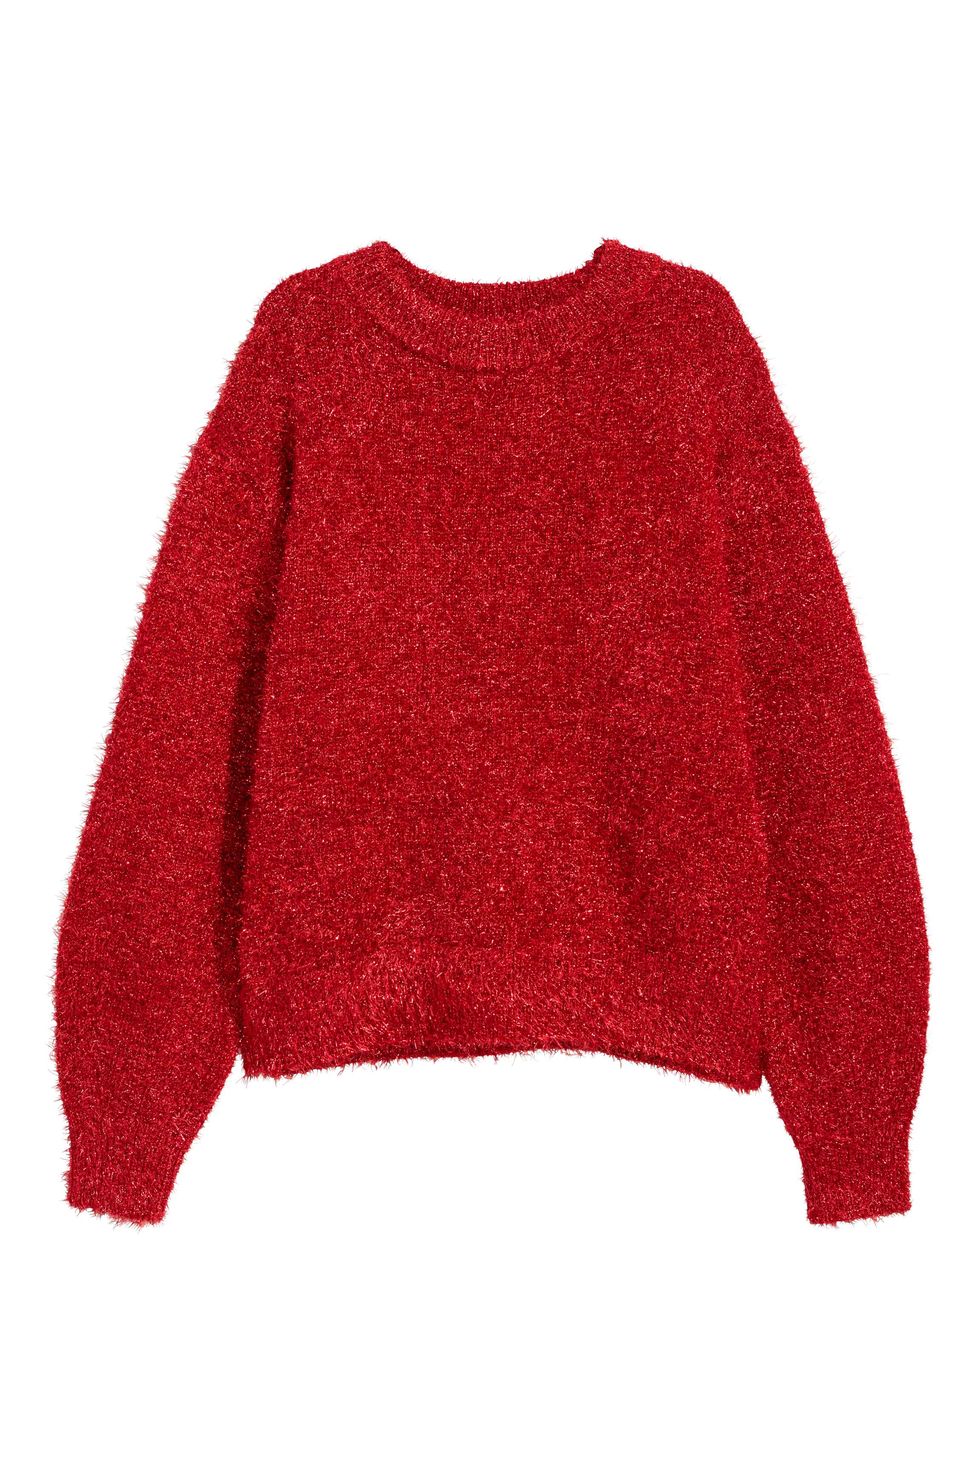 Clothing, Red, Outerwear, Sleeve, Sweater, Maroon, Woolen, Blouse, Top, Wool, 